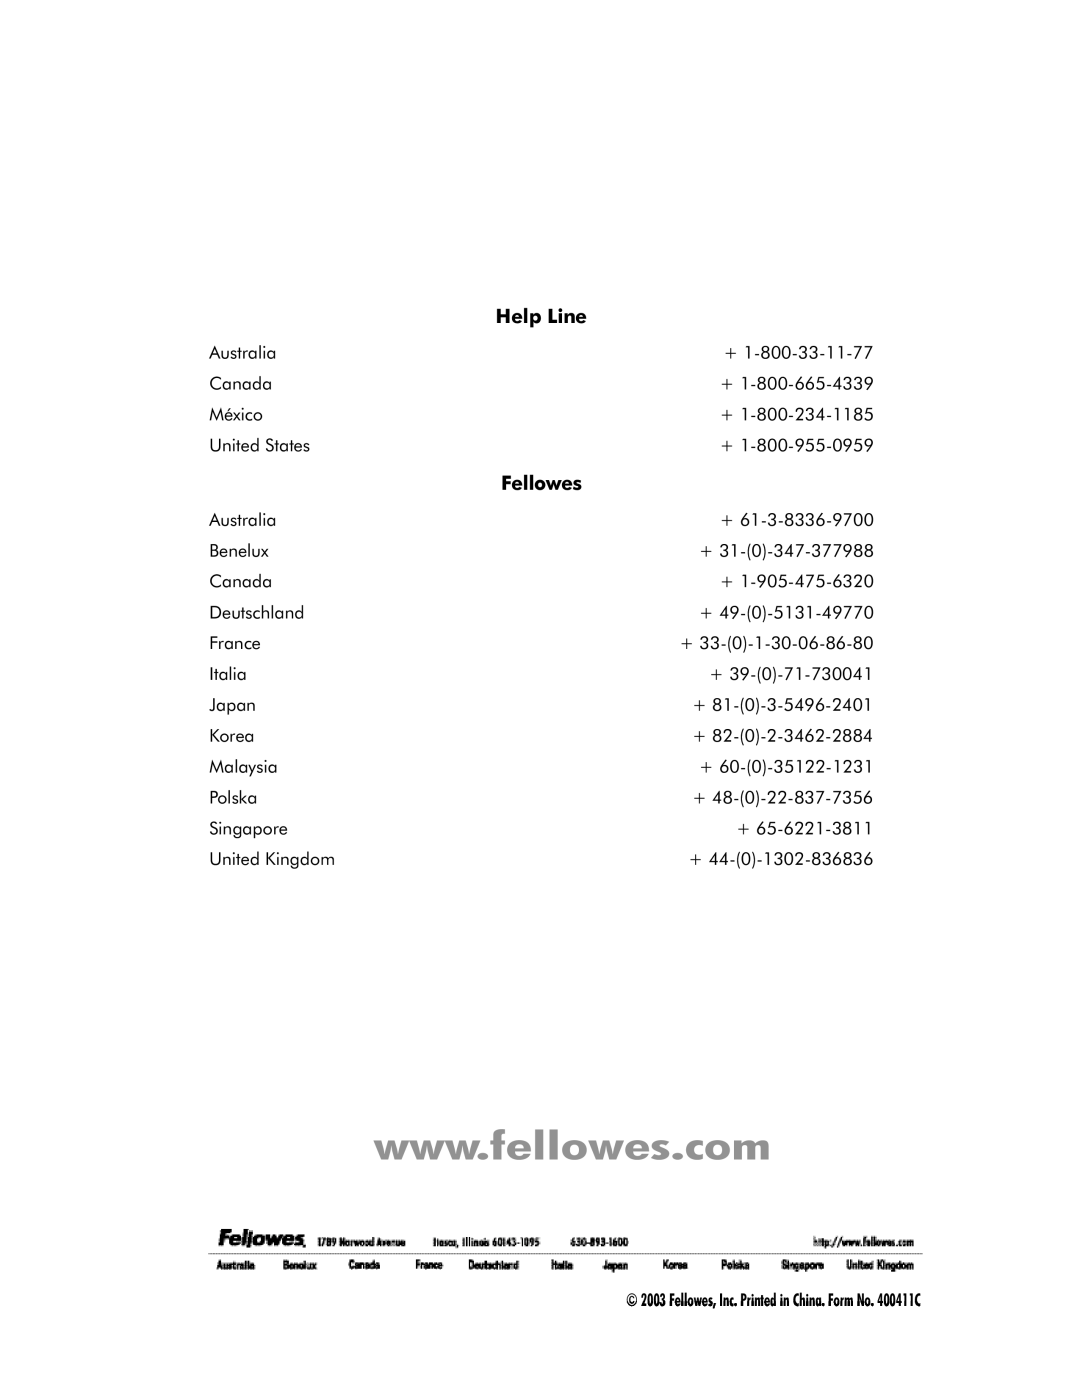 Fellowes EXL 125-2, EXL 45-2, EXL 95-2 manual Help Line, Fellowes, Inc. Printed in China. Form No. 400411C 